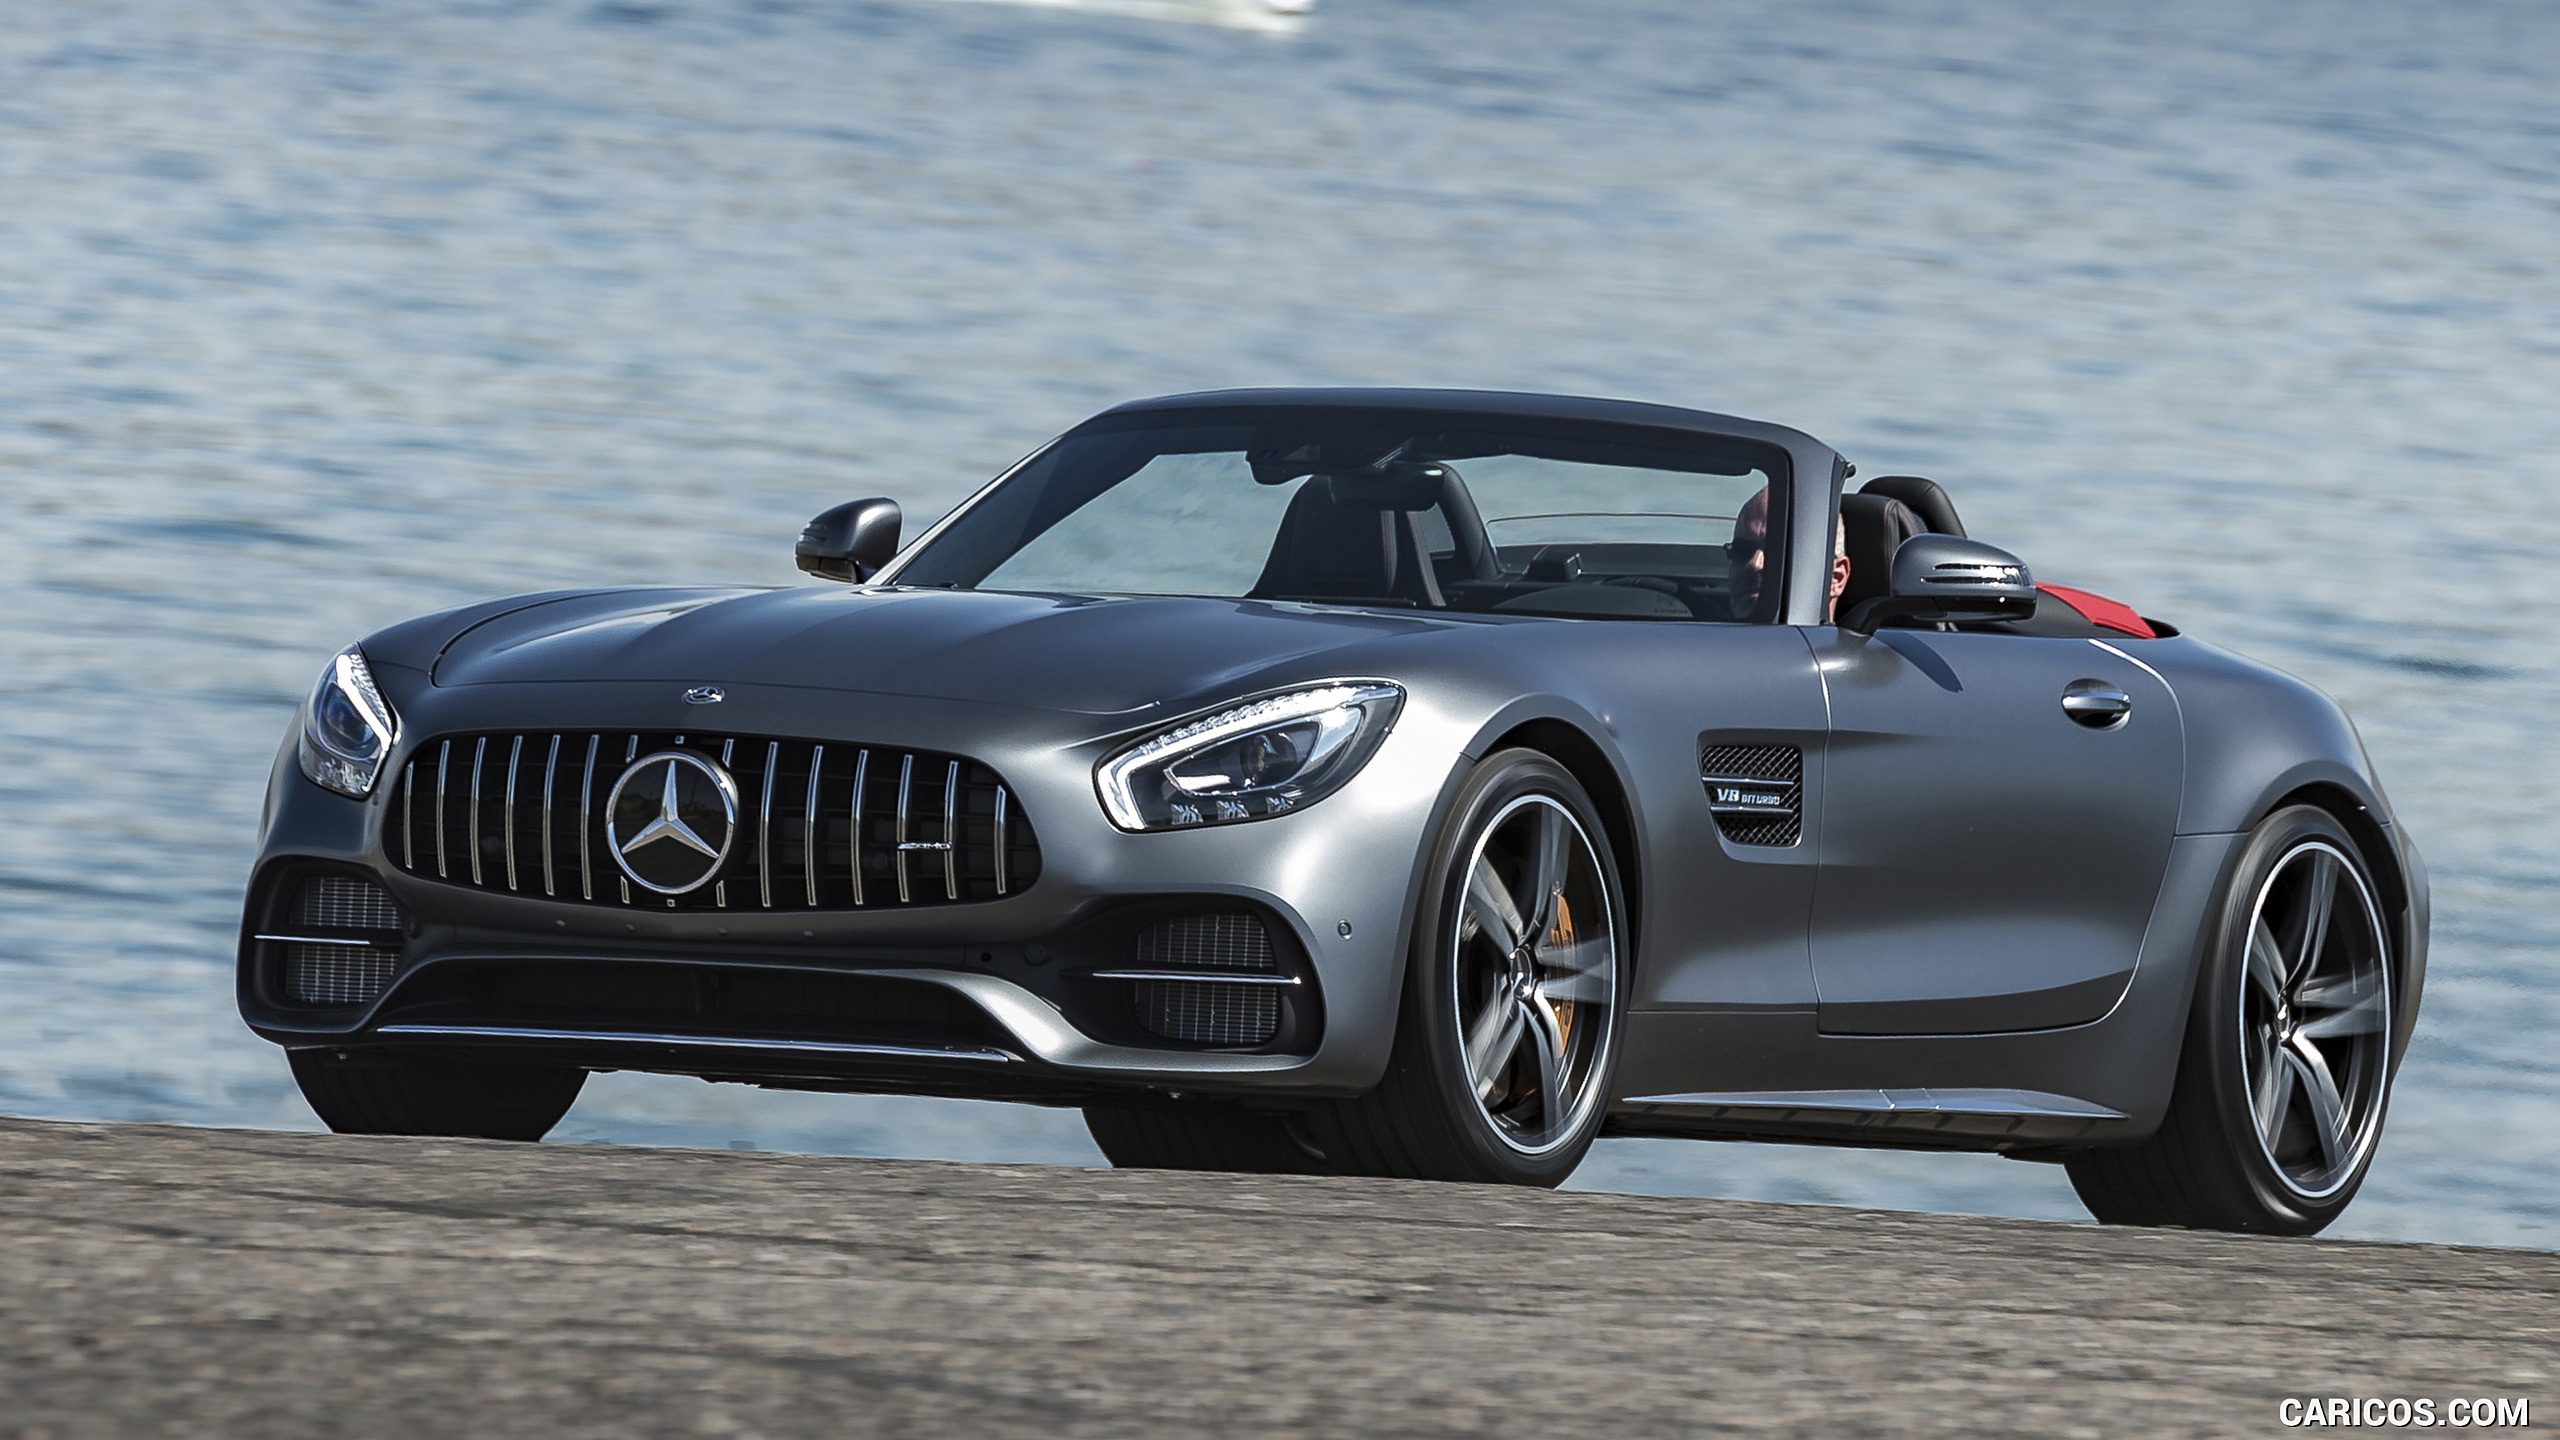 2018 Mercedes-AMG GT C Roadster - Front Three-Quarter, #301 of 350